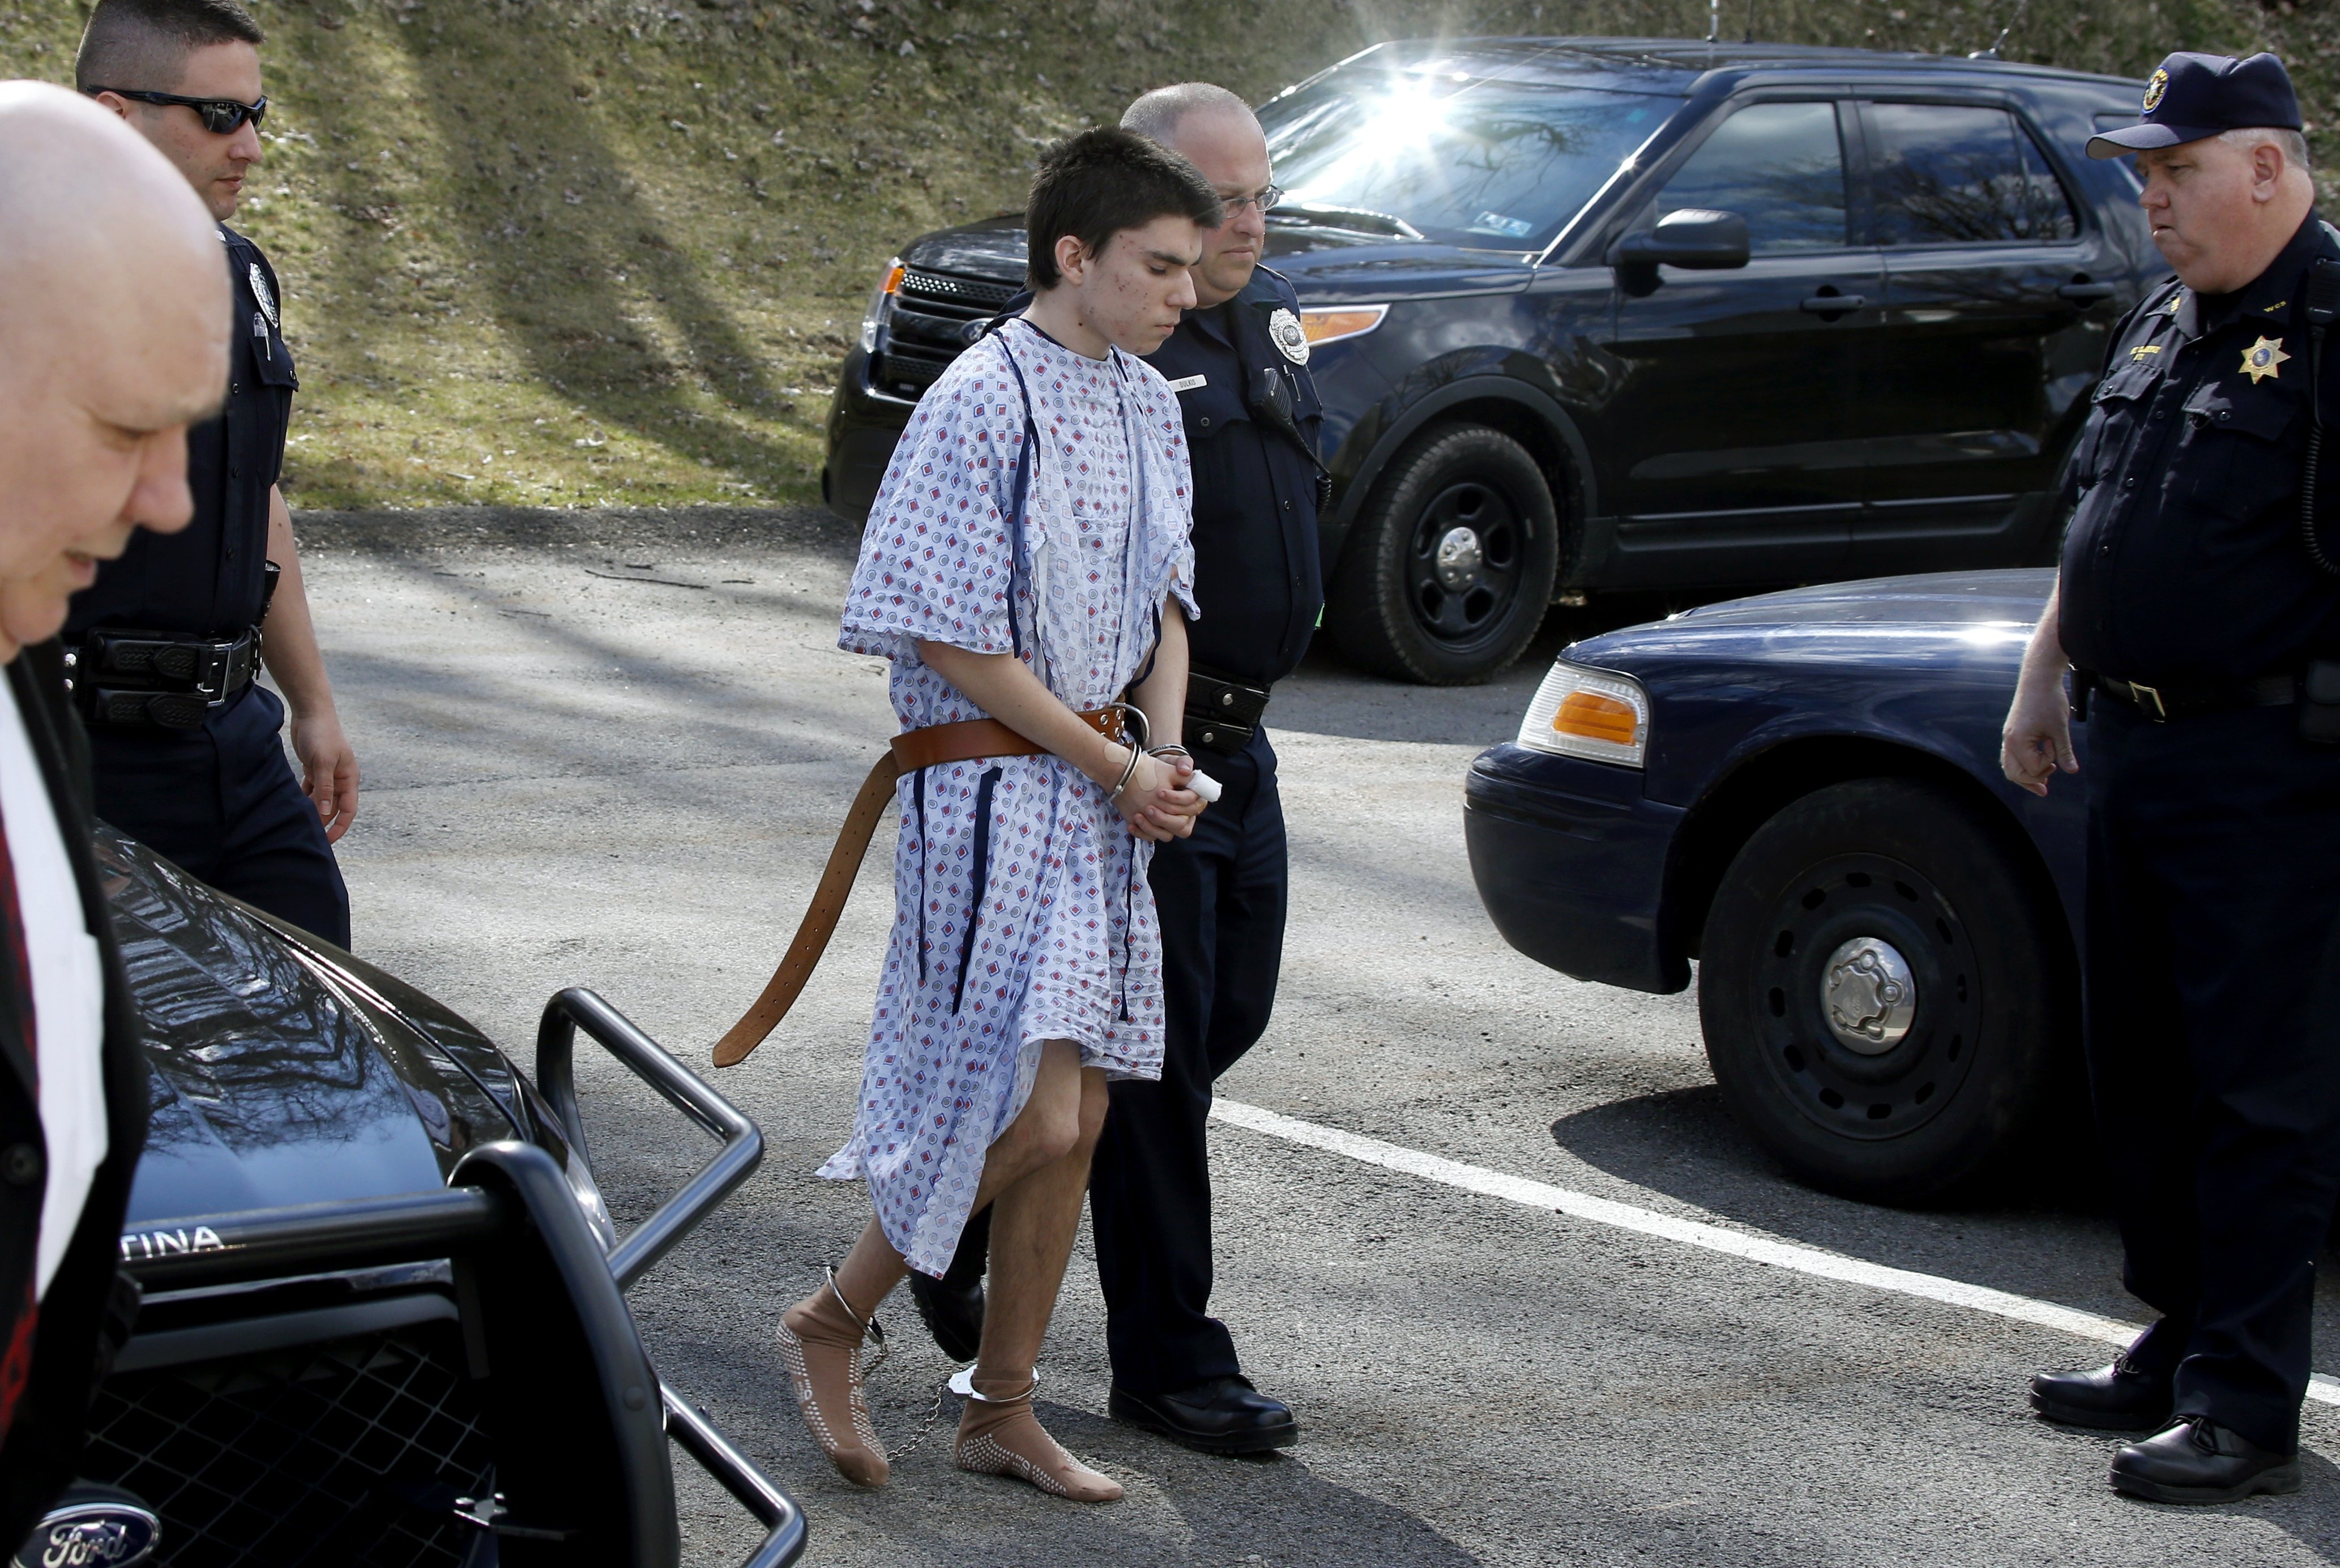 Alex Hribal, the suspect in the multiple stabbings at the Franklin Regional High School in Murrysville, Pa., is escorted by police to a district magistrate to be arraigned in Export, Pa., April 9, 2014. (Keith Srakocic—AP)